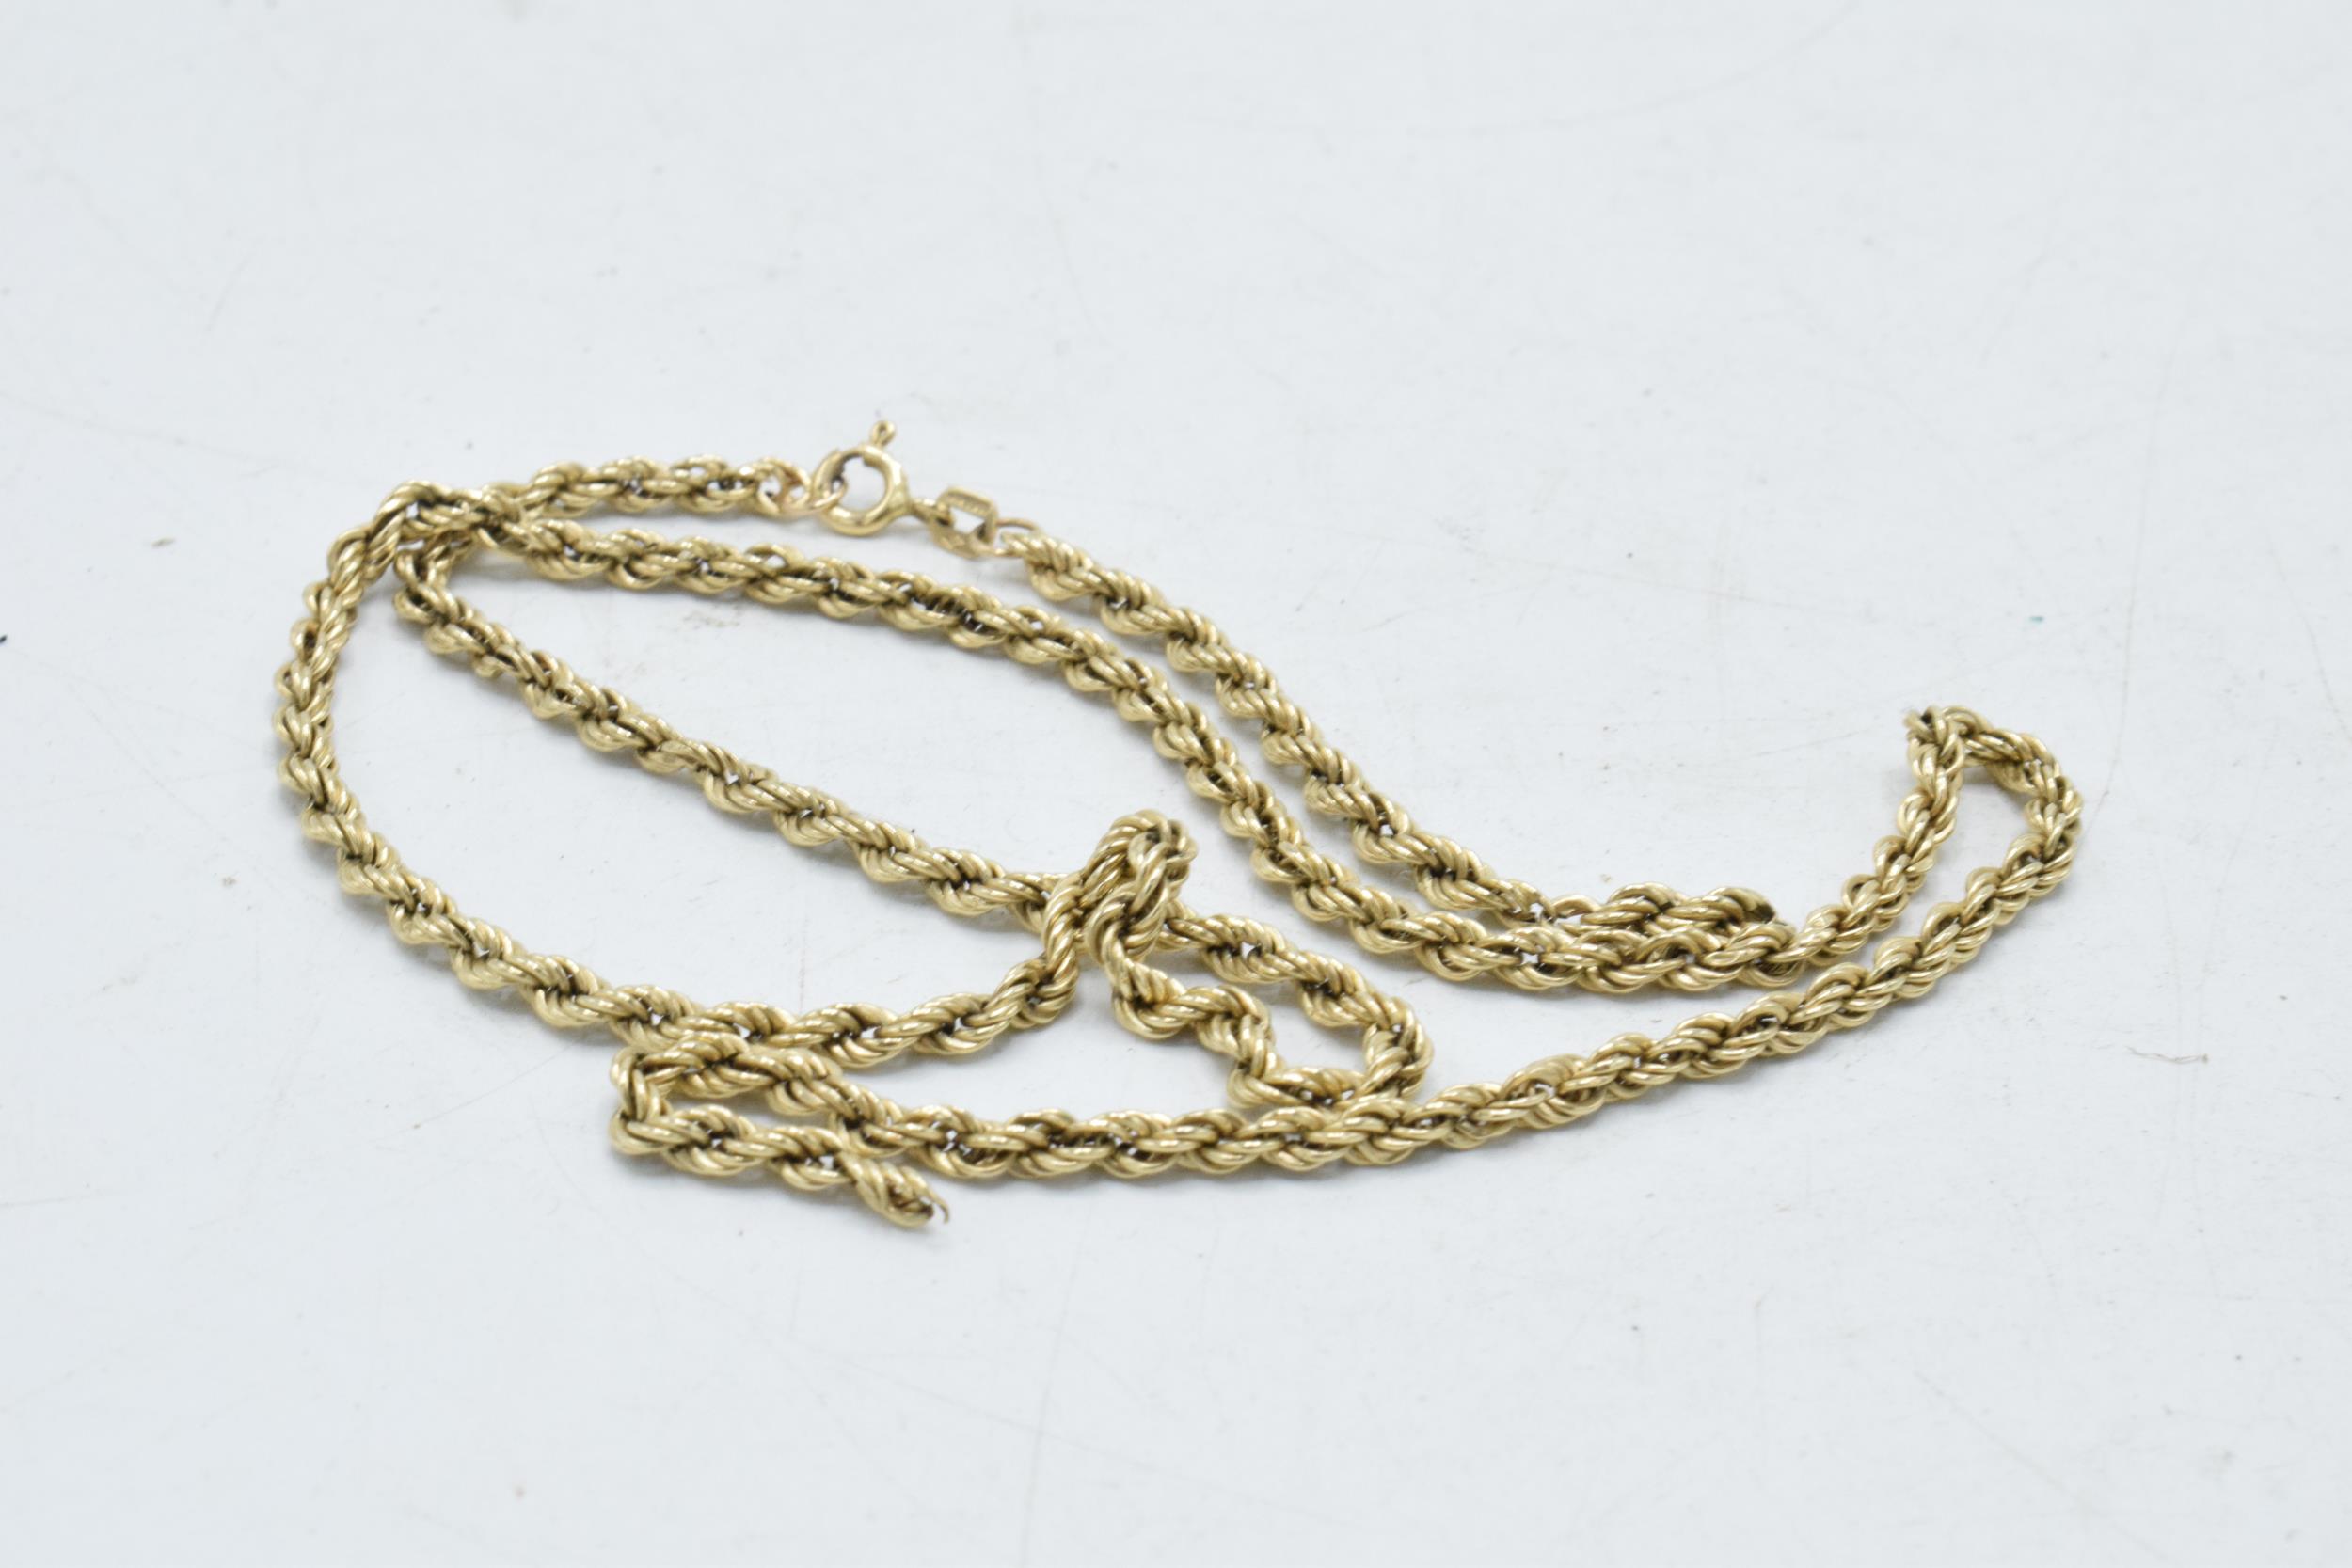 9ct gold rope chain, snapped, 3.5 grams, 49cm long. - Image 2 of 2